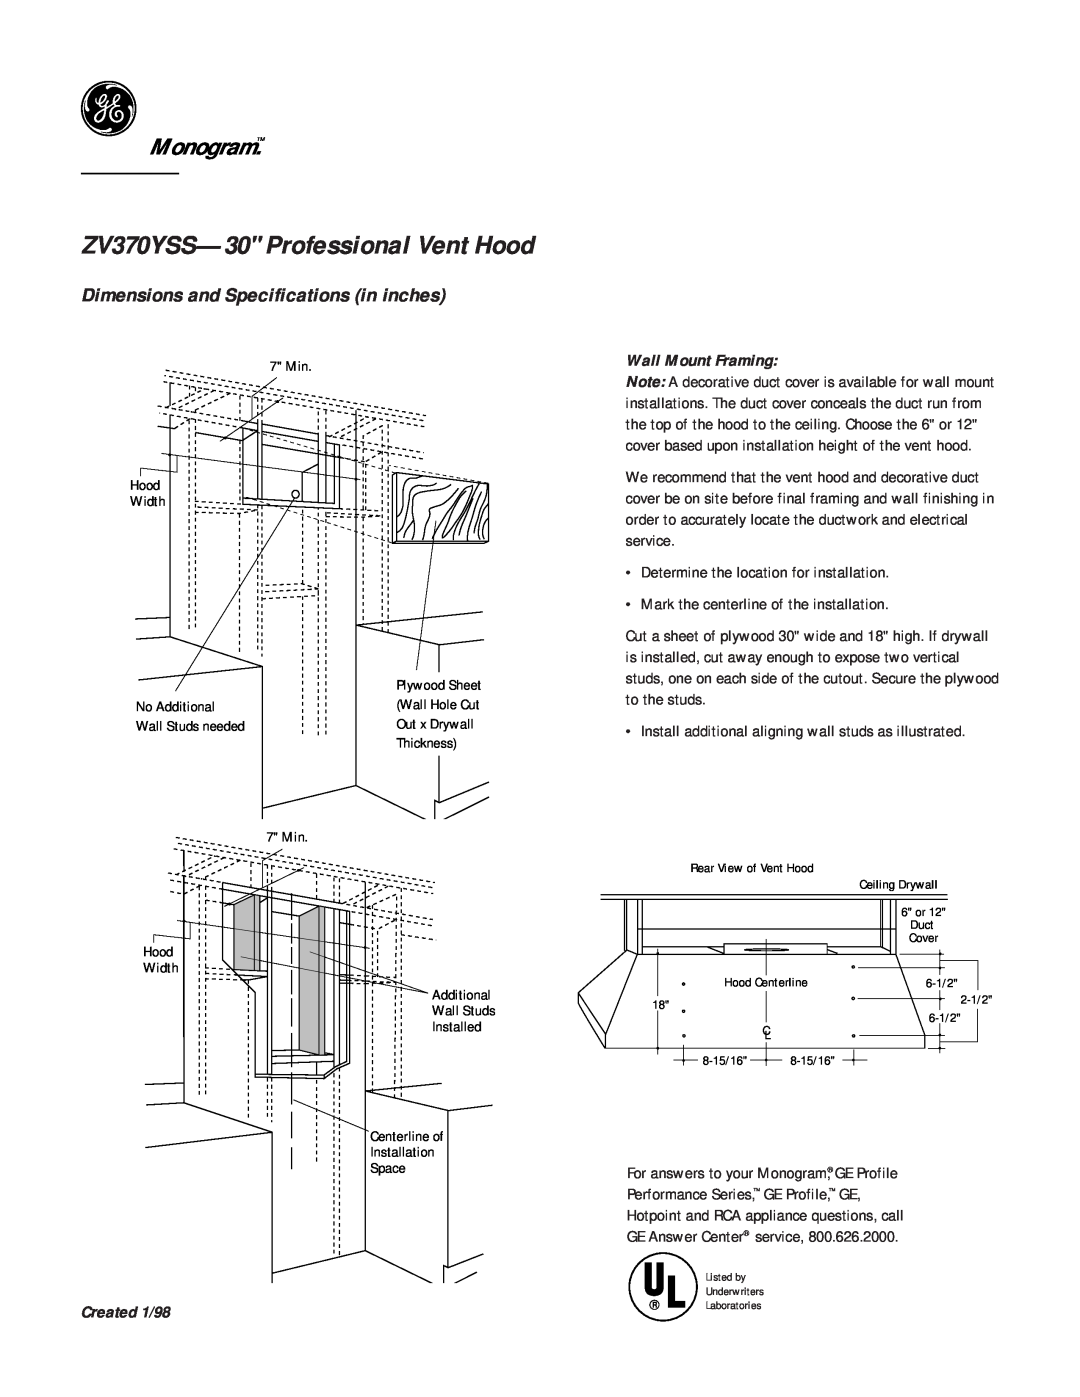 GE ZV370YSS--30 Wall Mount Framing, ZV370YSS-30 Professional Vent Hood, Monogram, Dimensions and Specifications in inches 